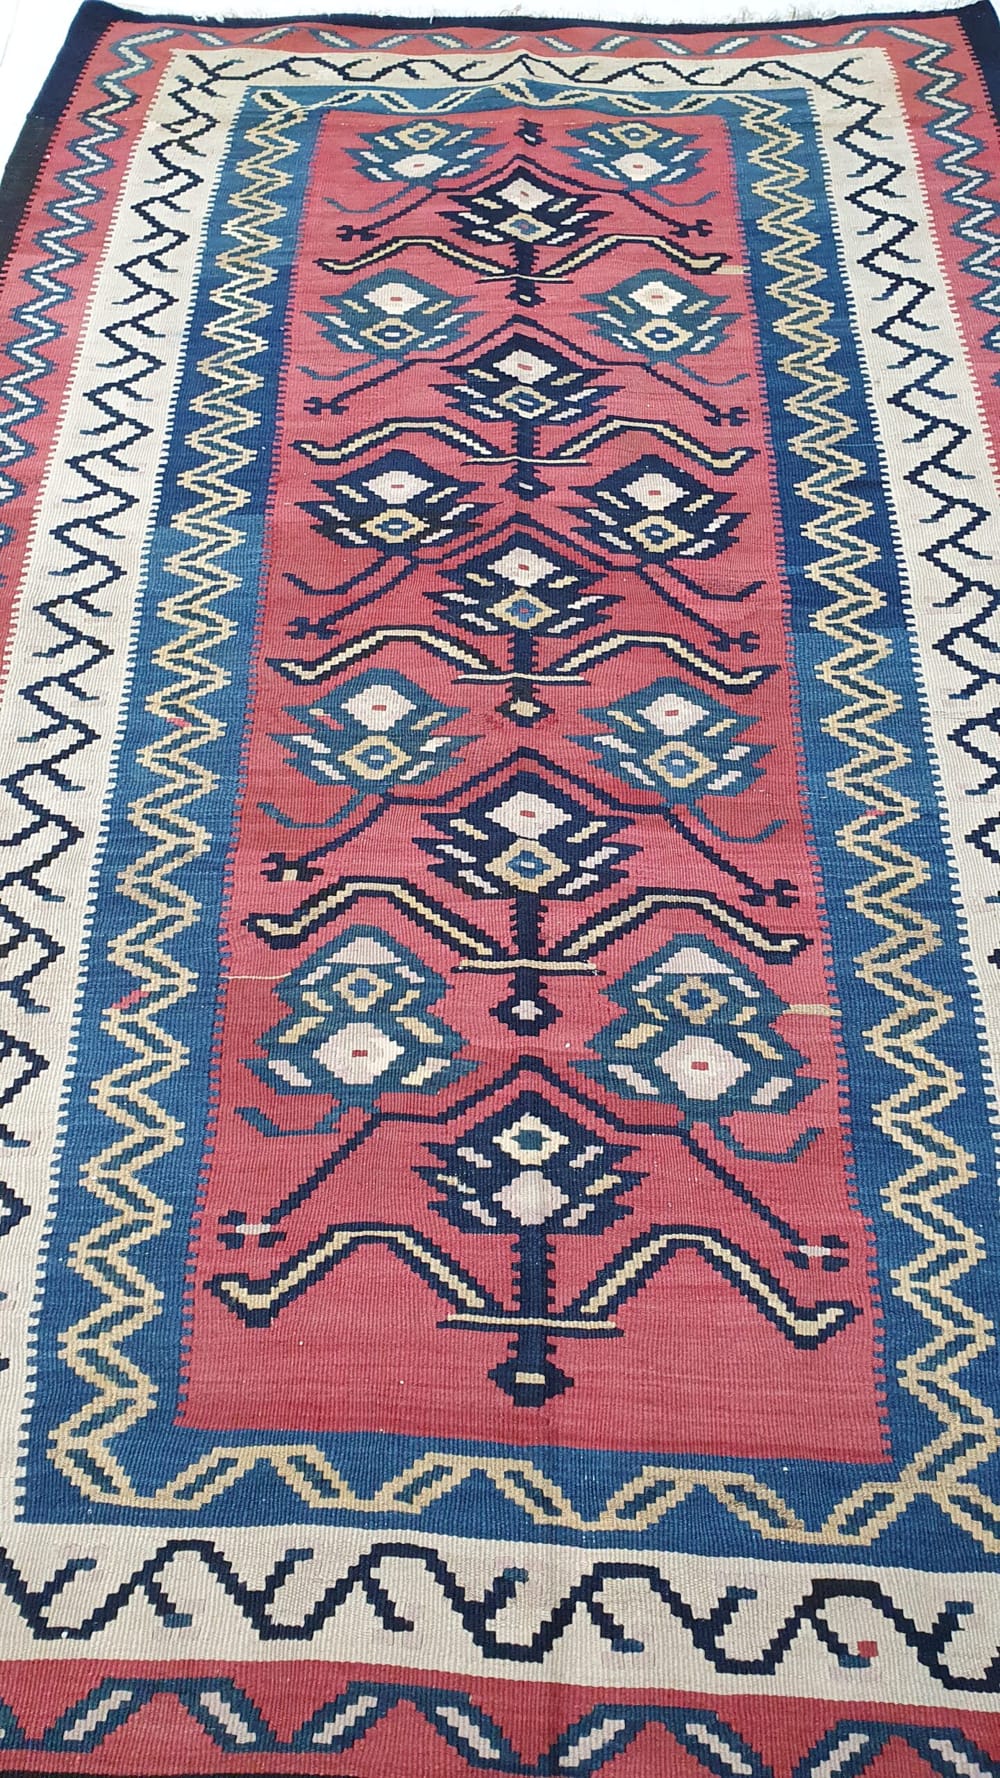 Rug# 3276, Antique Azarbaiejan Kilim, circa 1910, bedding cover, all wool, Persia, size 226x145 cm, RP $2000, on special $550 (2)